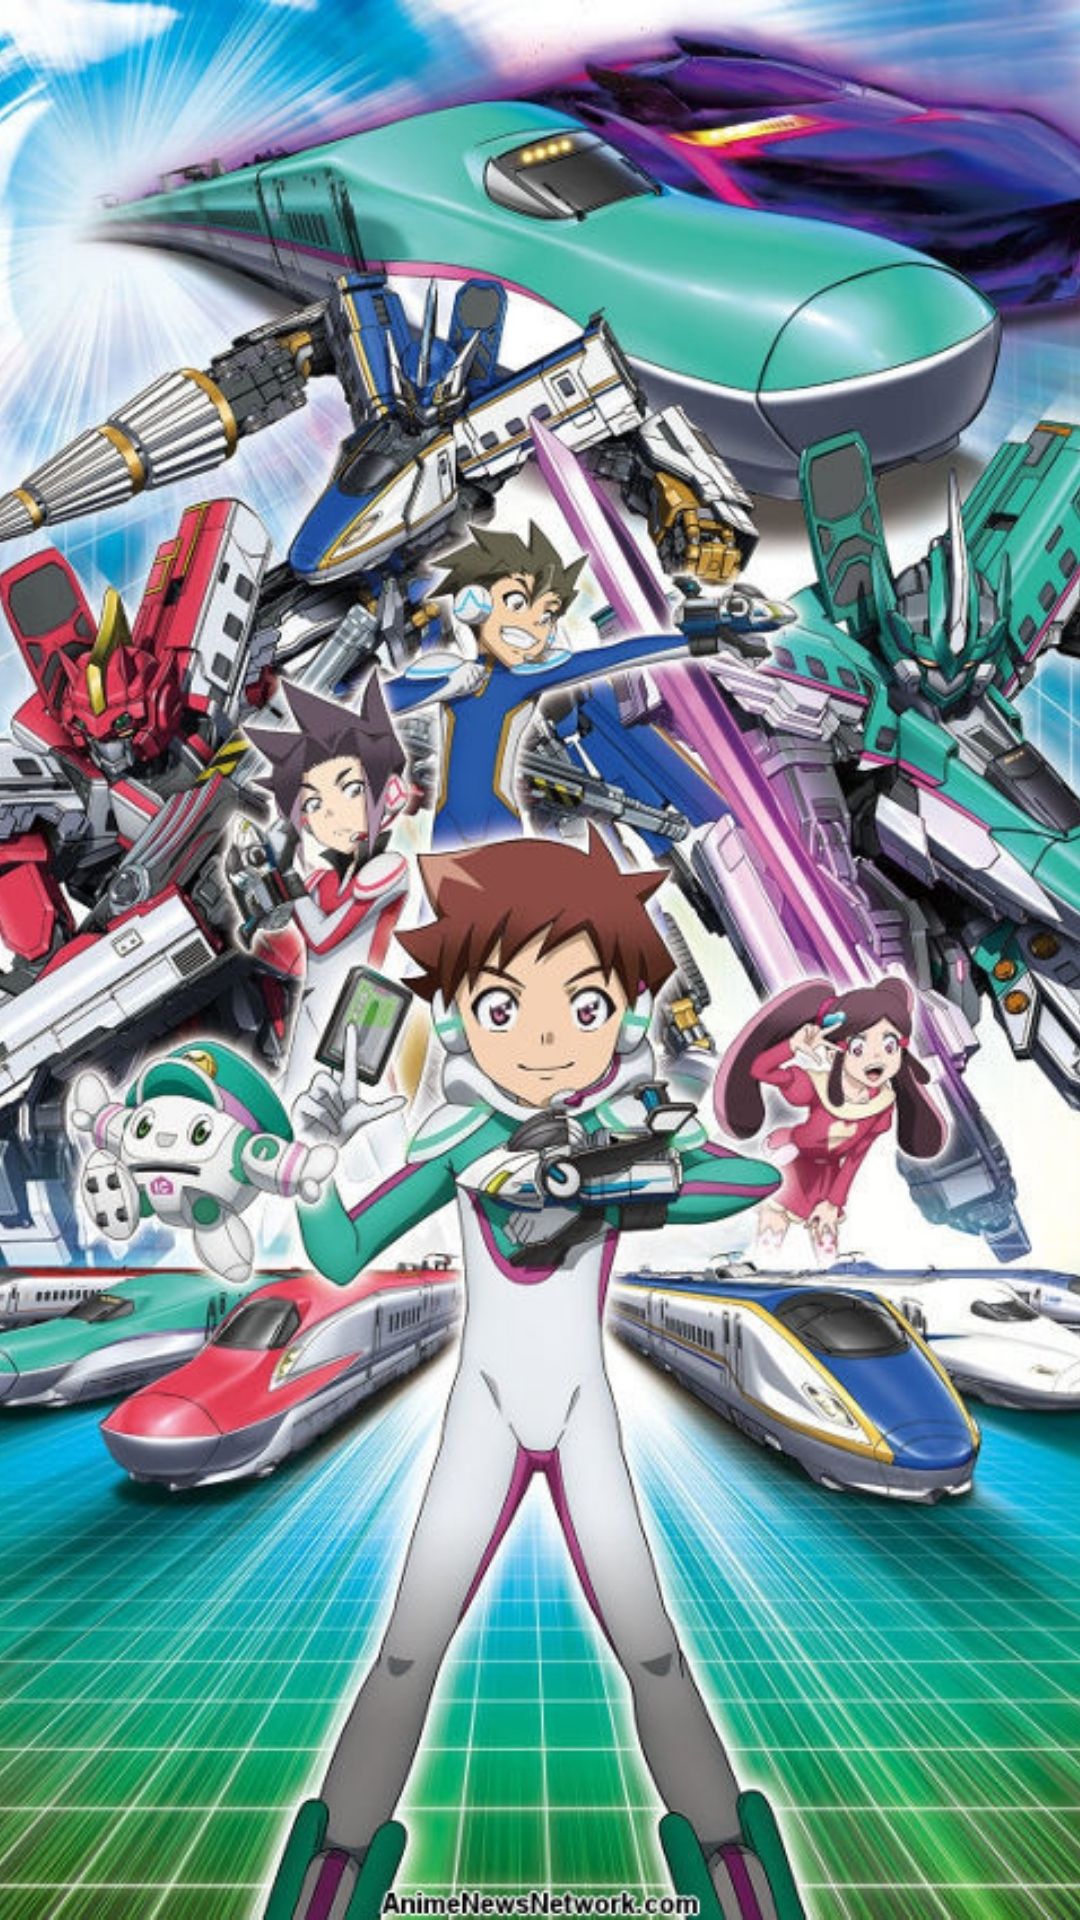 5kxyr S Dtjejm In the anime's story, hayato and other children will serve as conductors to pilot the shinkalion. 2